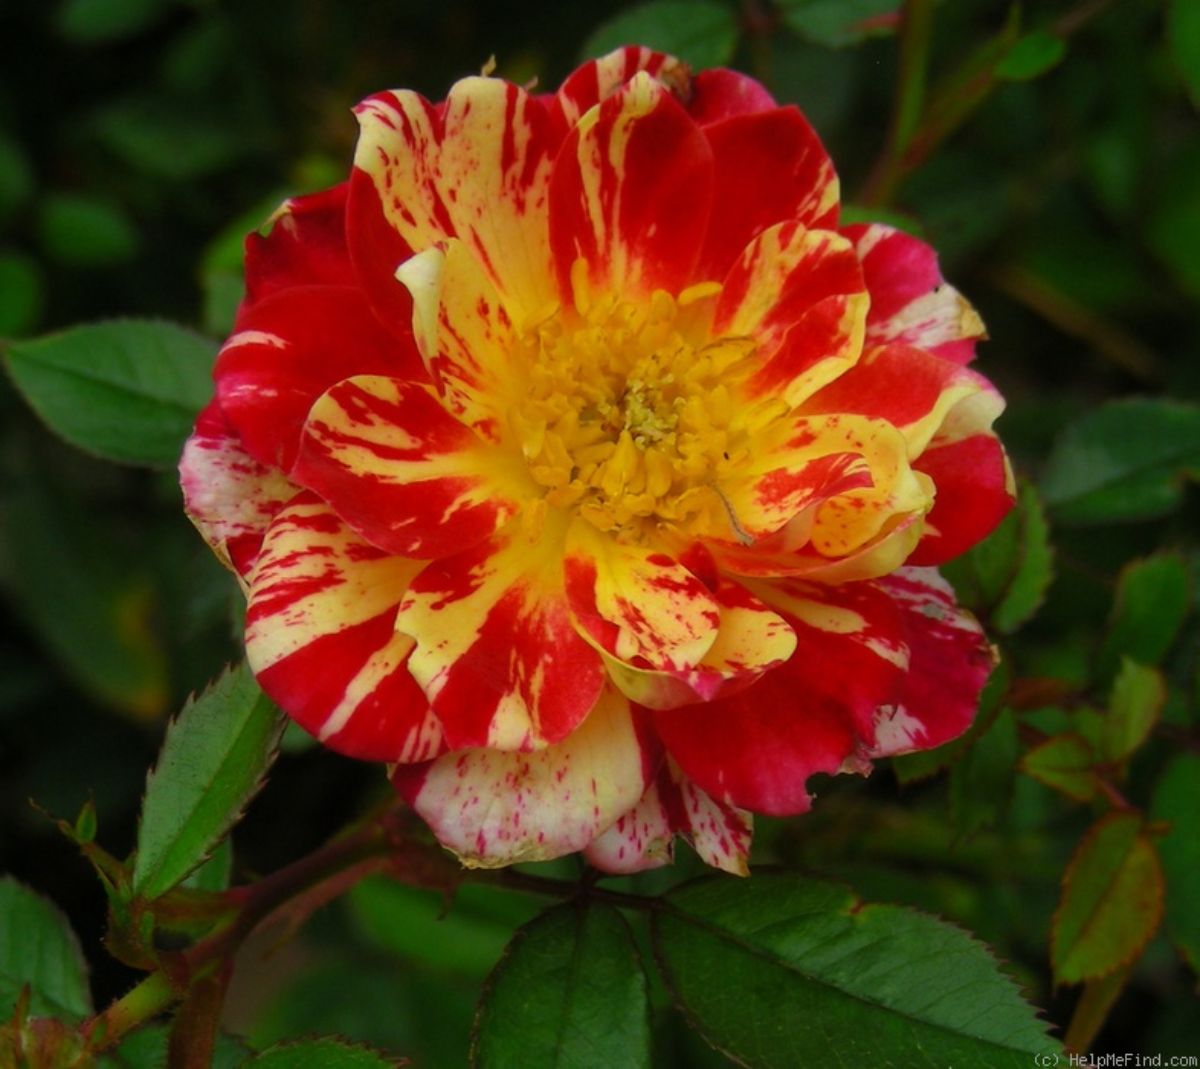 A close-up of a Charlie Brown Rose flower with striped petals.